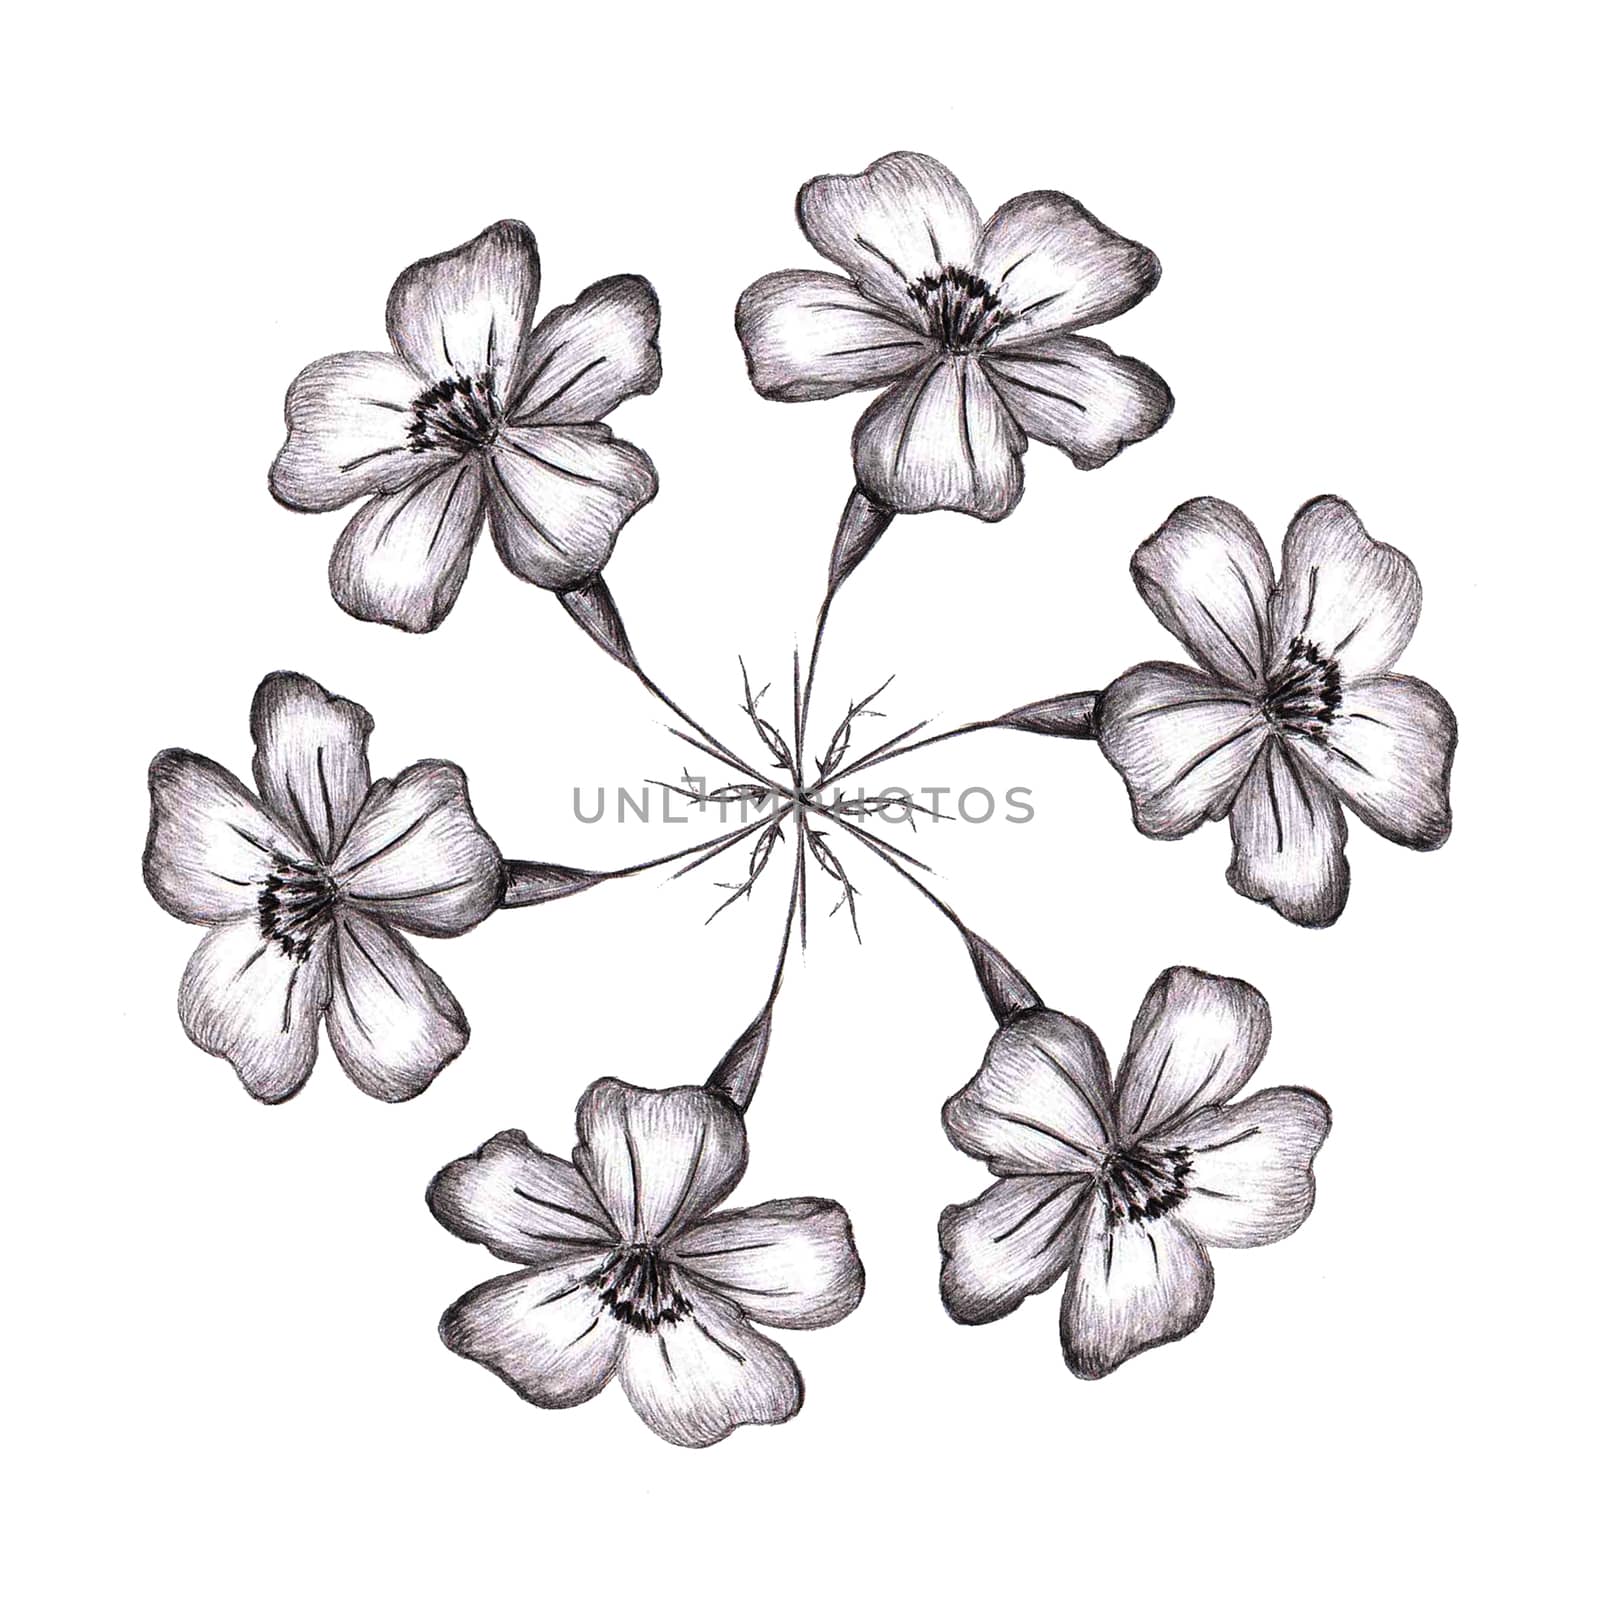 Black Hand-Drawn Isolated Flower Circle Composition. Monochrome Botanical Plant Illustration in Sketch Style. Thin-leaved Marigolds for Print, Tattoo, Design, Holiday, Wedding and Birthday Card.